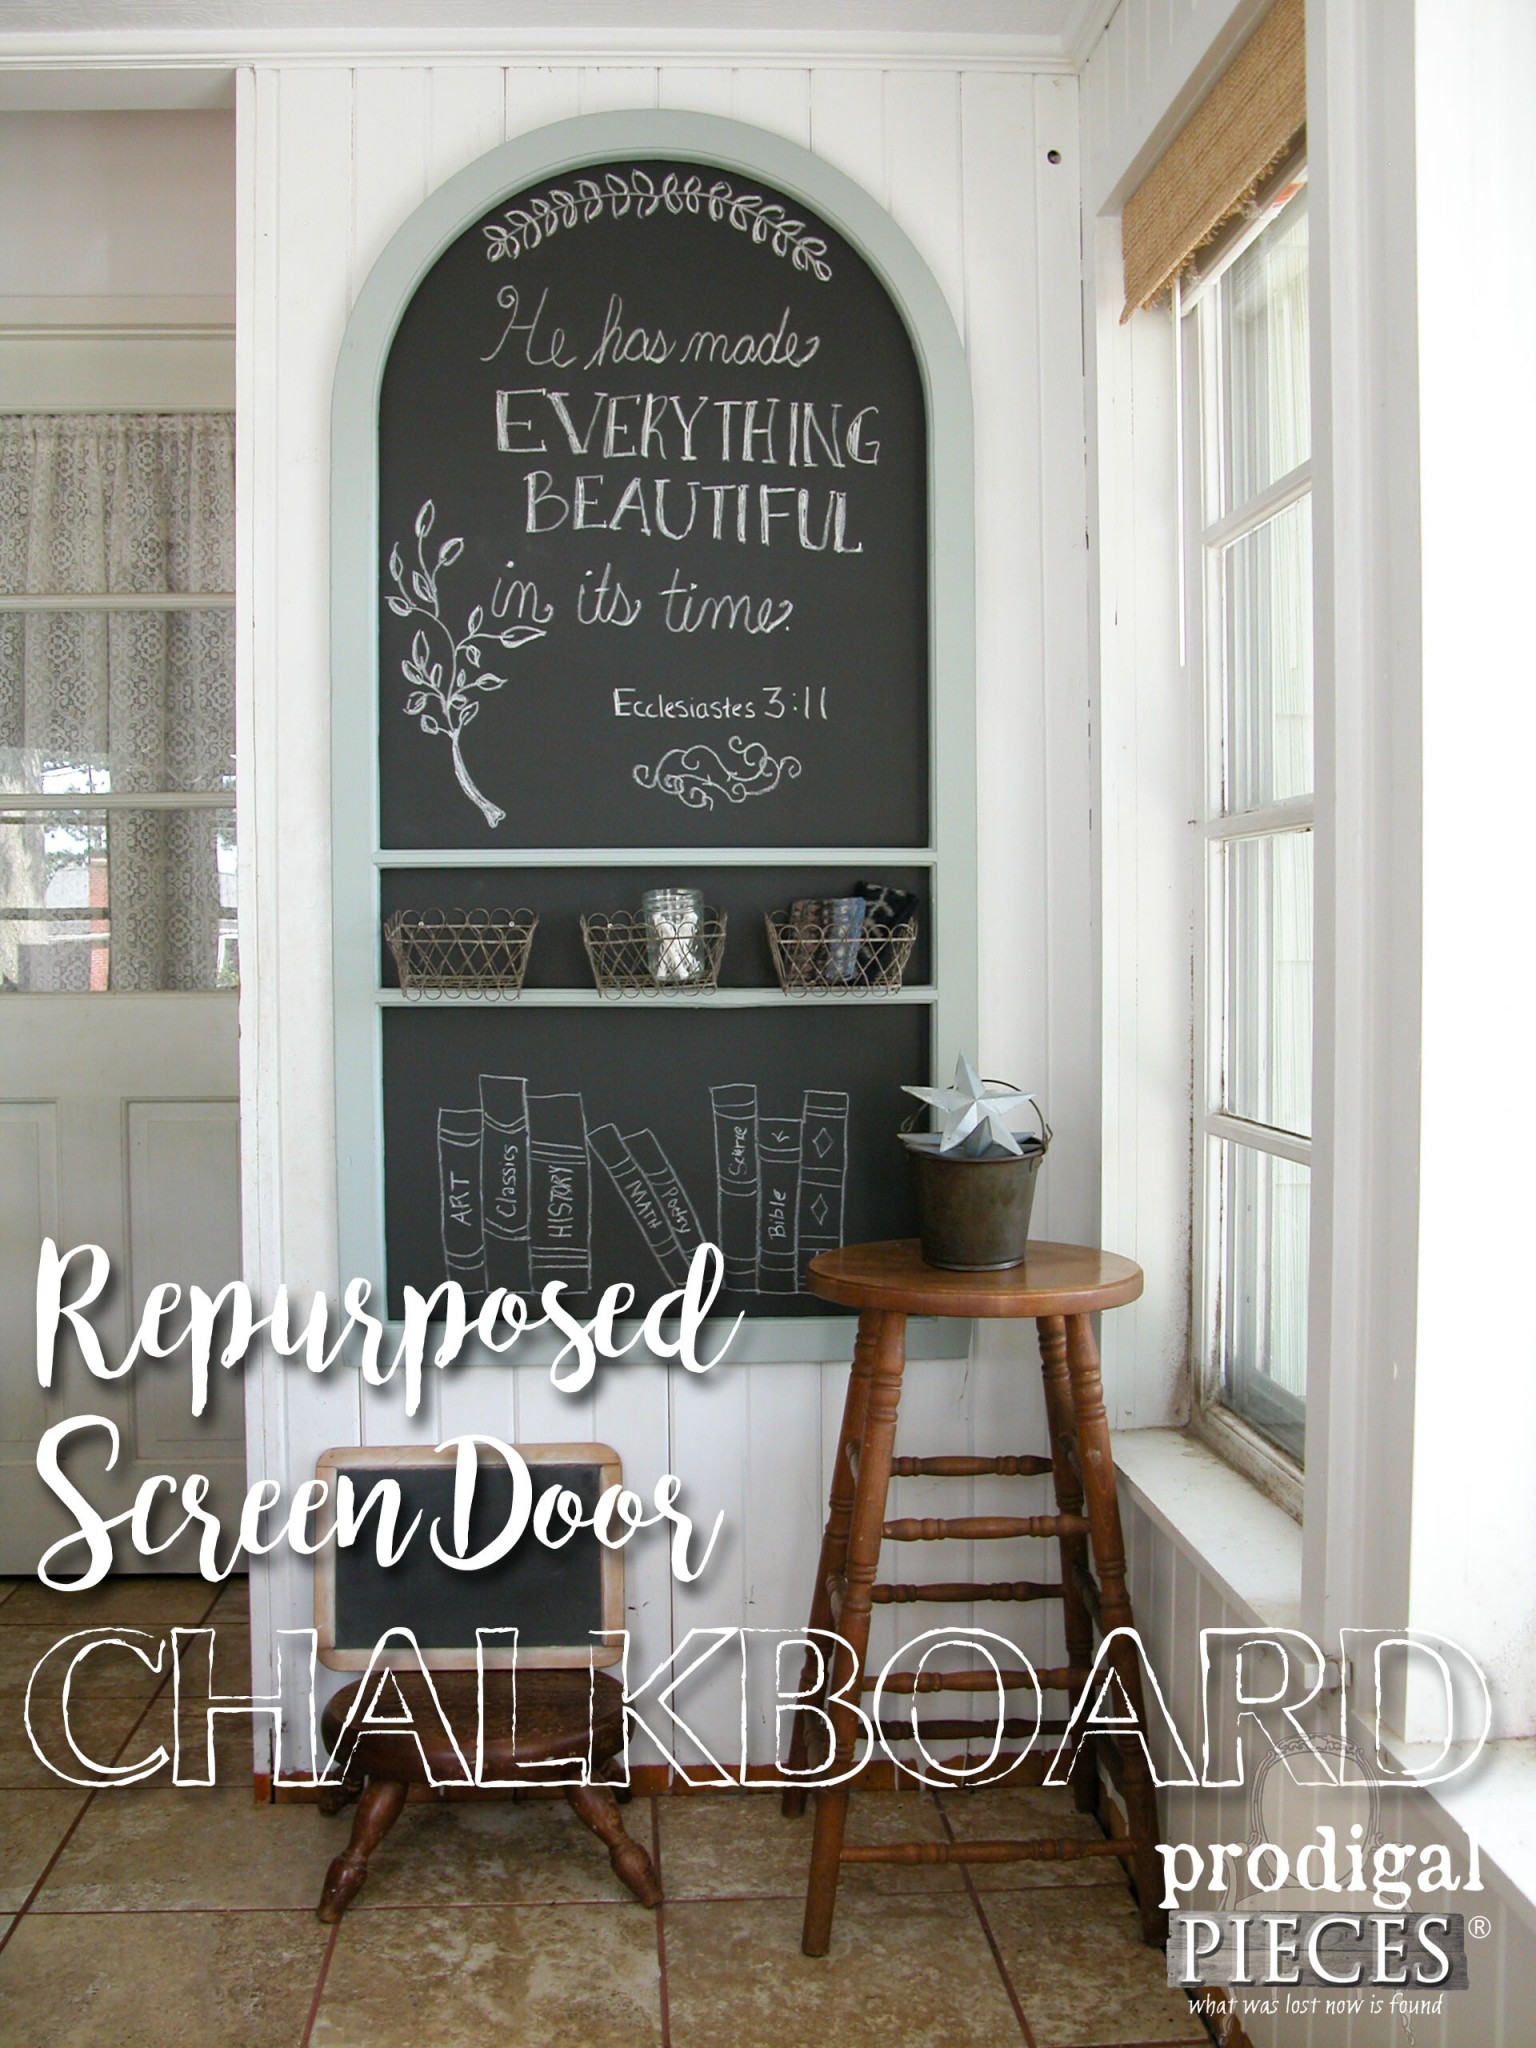 Repurpose Screen Door Turned Chalkboard Wall Art by Prodigal Pieces | www.prodigalpieces.com